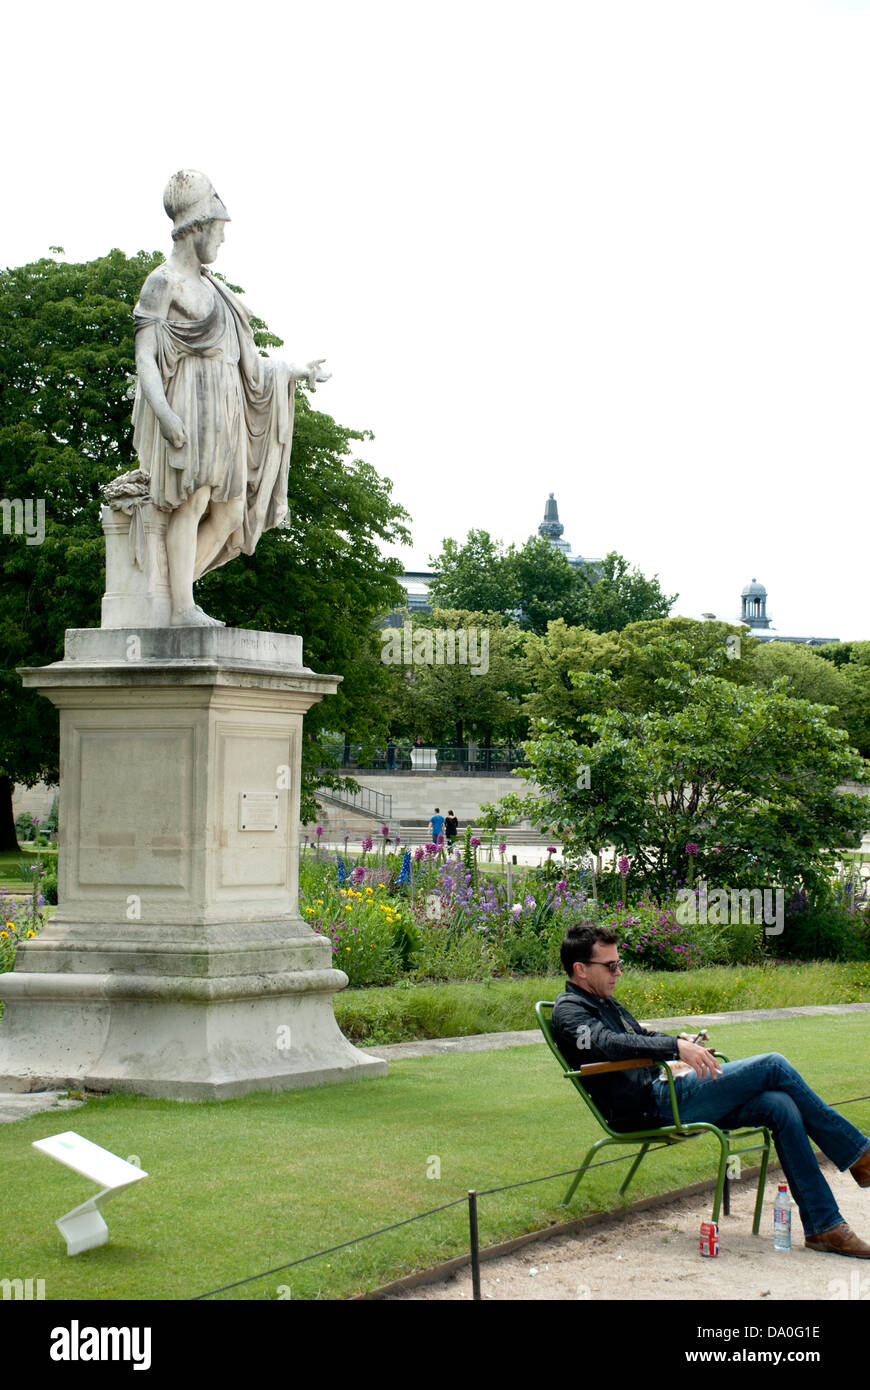 A man relaxing in a chair in the Jardin des Tuileries, Paris, next to a statue of Pericles, democratic emperor of old Athens. Stock Photo